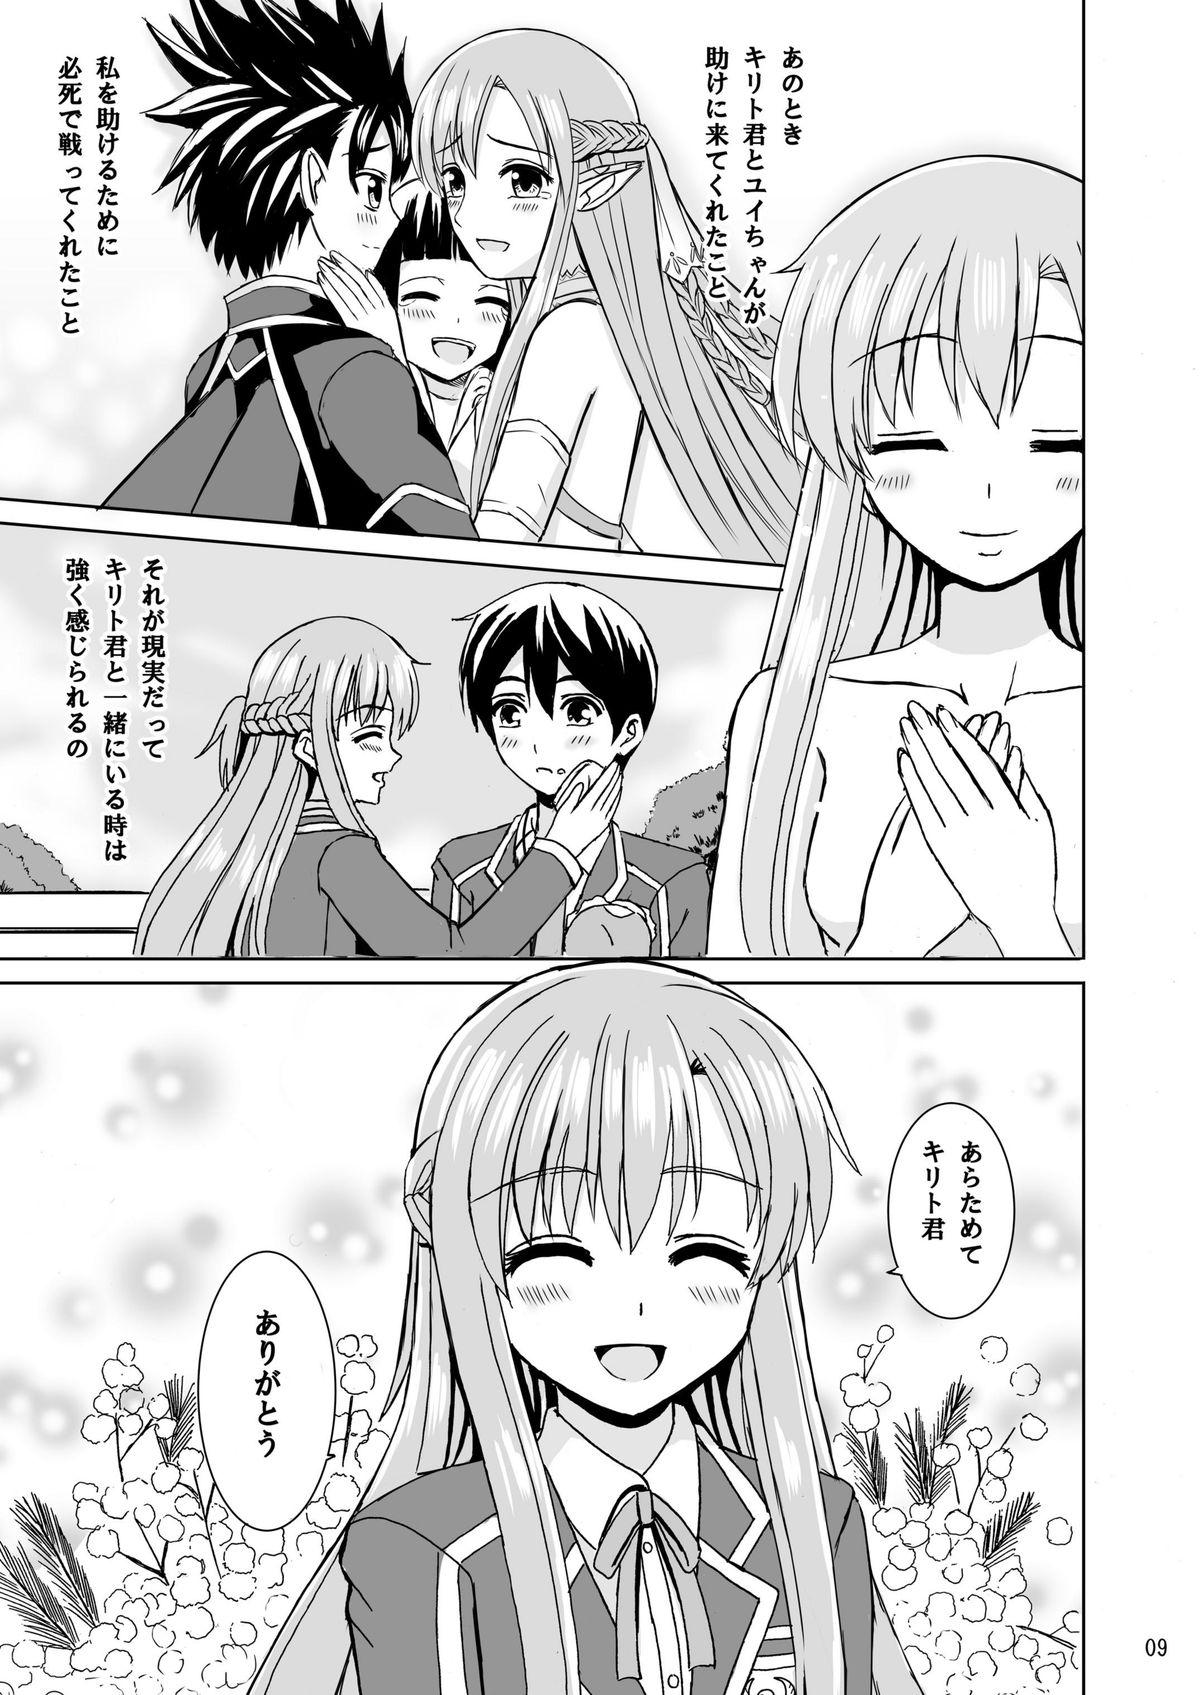 Shorts Zutto Kimi to Issho ni - Sword art online Cunt - Page 9